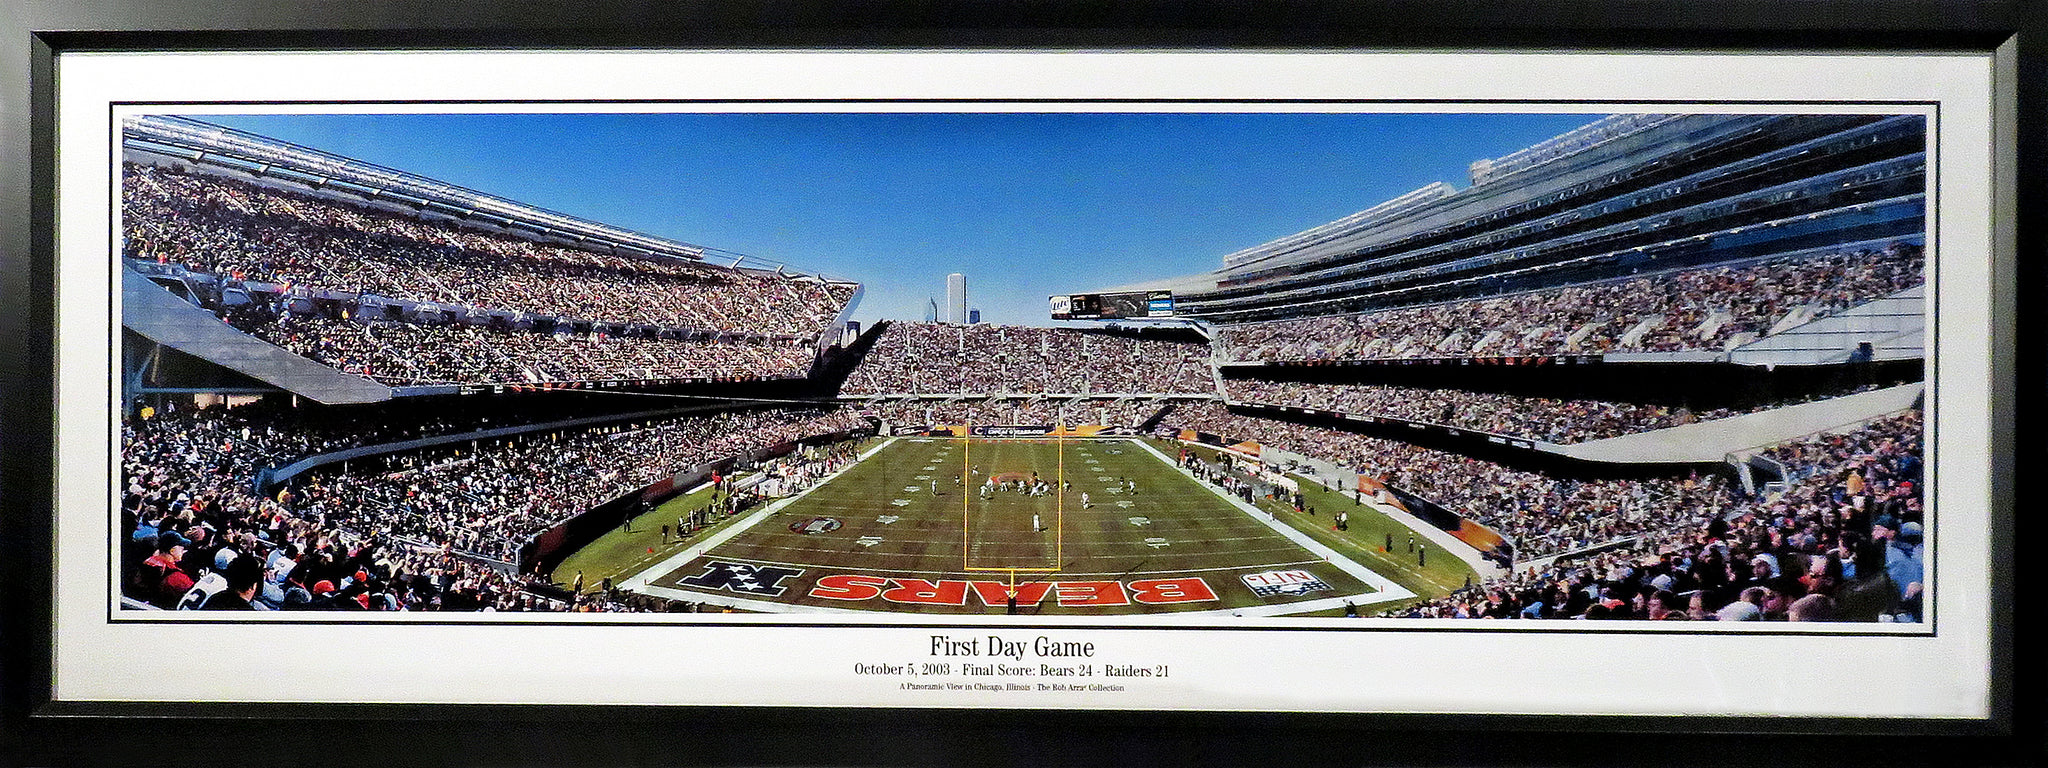 Chicago Bears New Soldier Field Panoramic Framed – Behind the